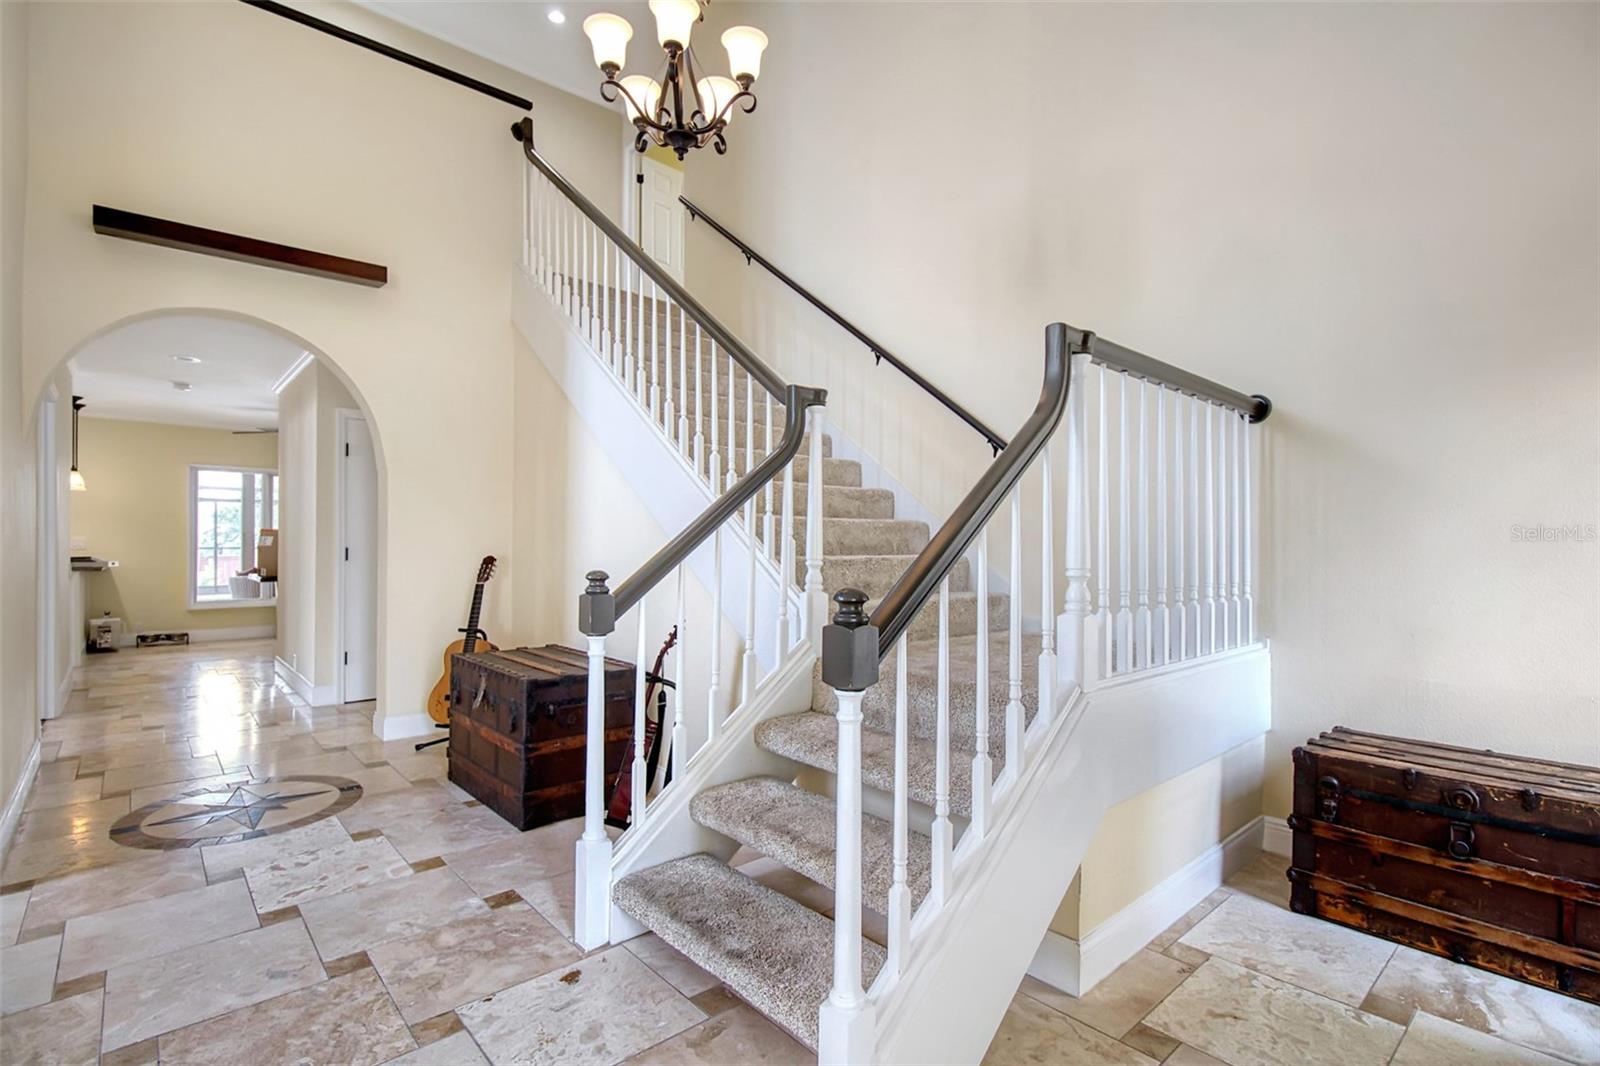 Enter home through the double front doors to the wide grand staircase and formal living room/flex space